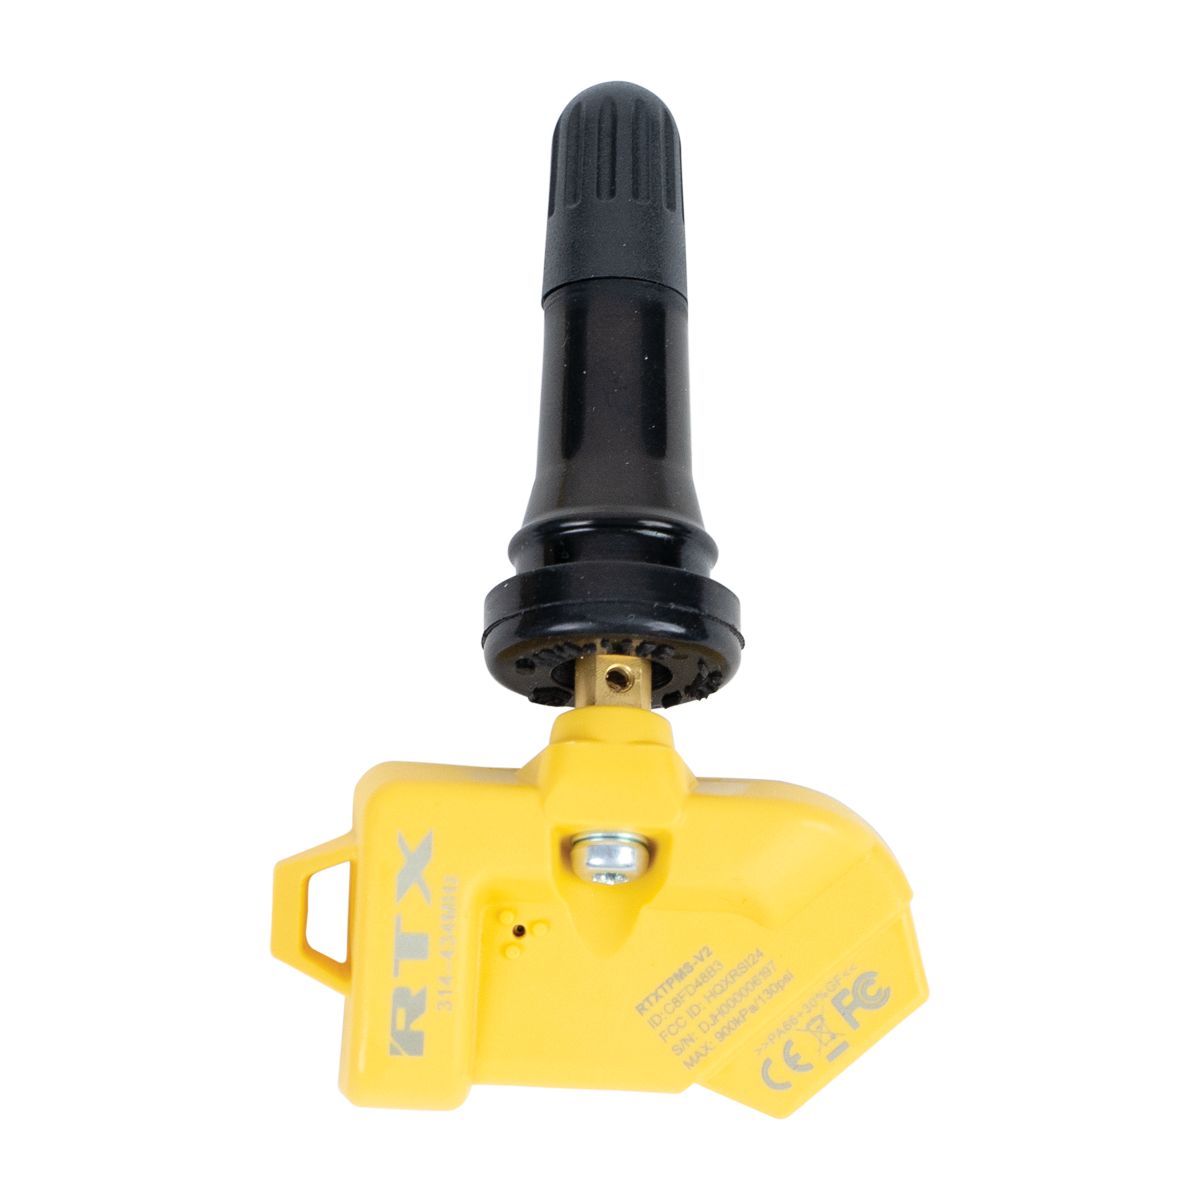 Universal TPMS Valve for Tire Pressure Monitoring